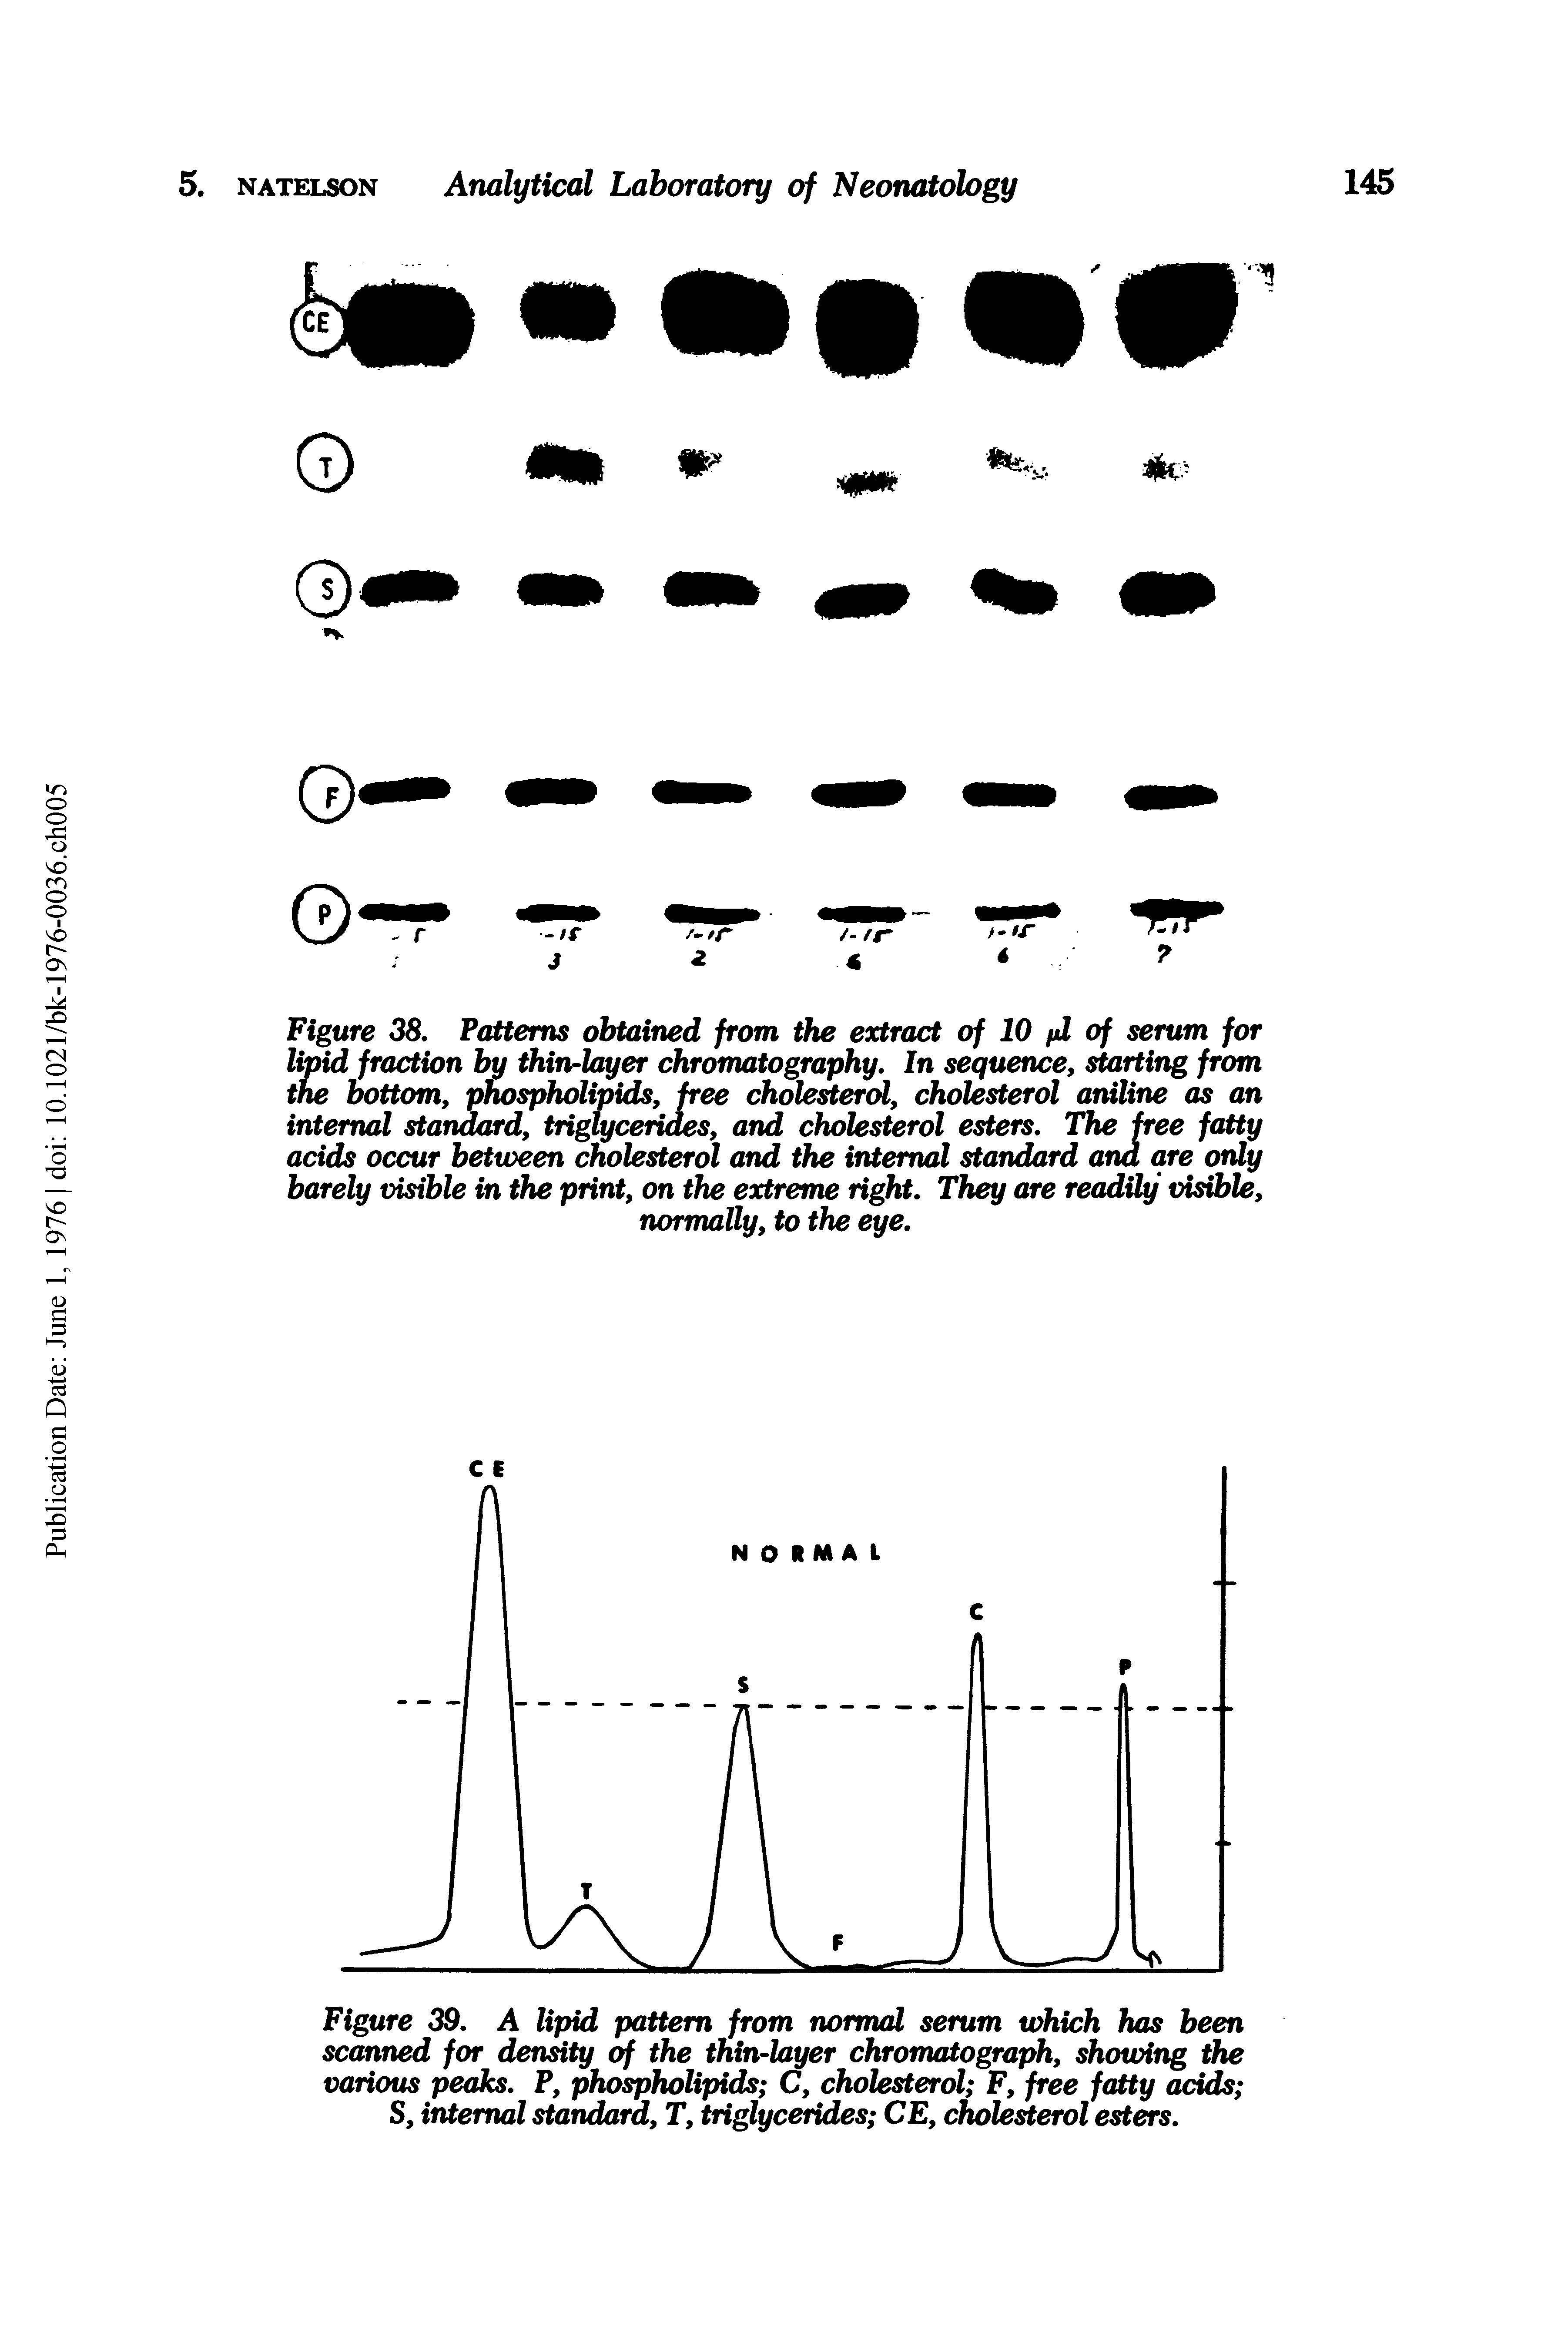 Figure 38, Patterns obtained from the extract of 10 fd of serum for lipid fraction by thin-layer chromatography. In sequence, starting from the bottom, phospholipids, pee cholesterol, cholesterol aniline as an internal standard, triglycerides, and cholesterol esters. The free fatty acids occur between cholesterol and the internal standard and are only barely visible in the print, on the extreme right. They are readily visible, normally, to the eye.